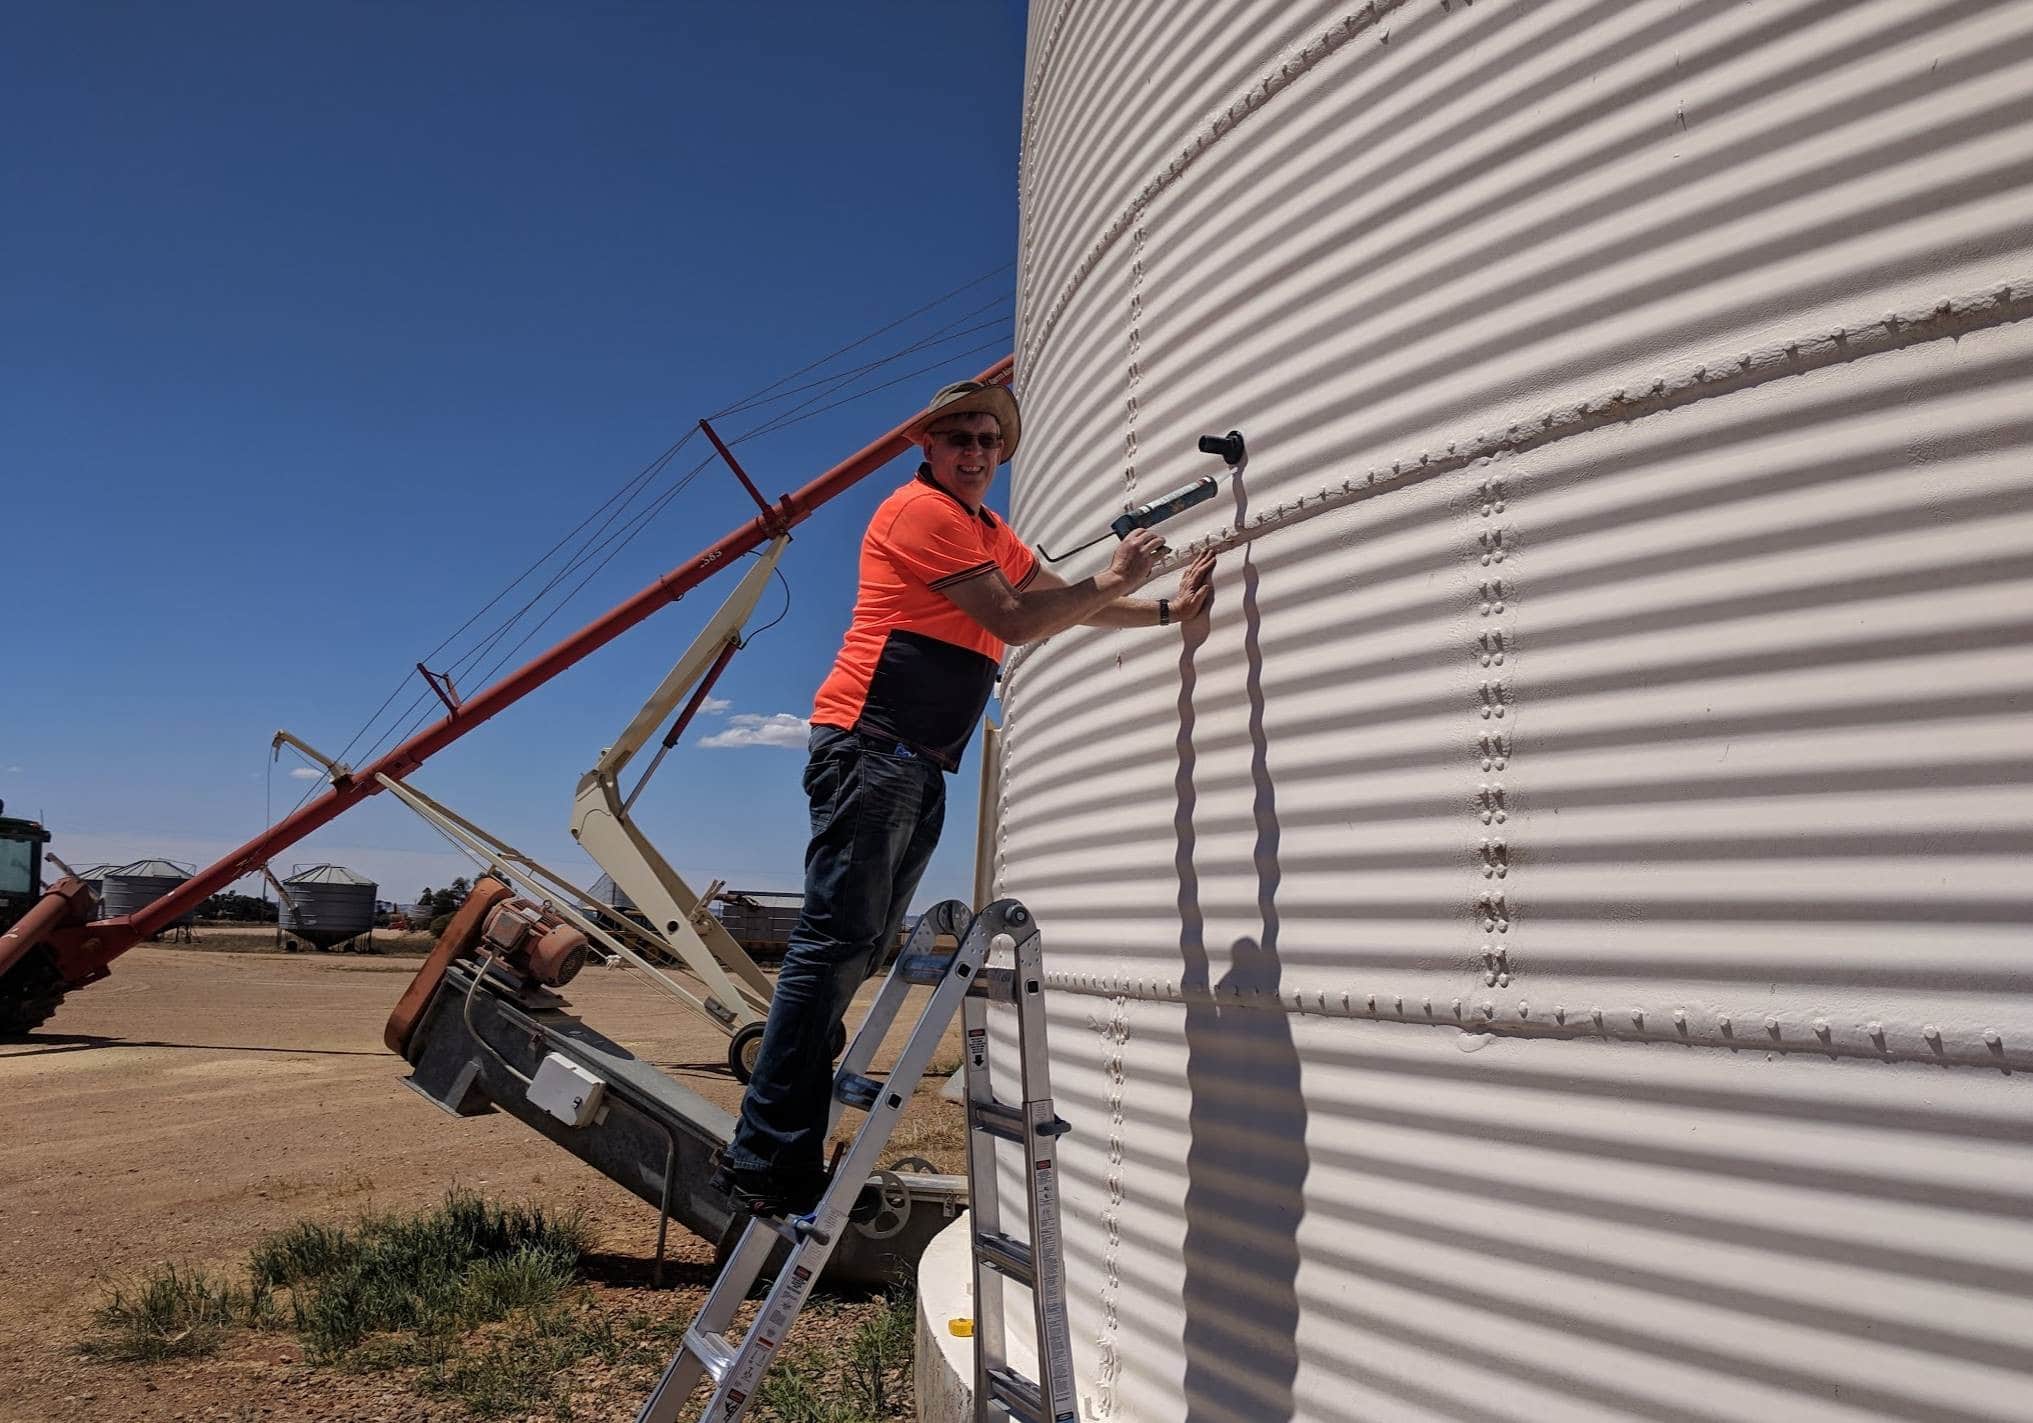 Strategies to enhance the value of On-Farm grain storage in South Australia (USA219T)